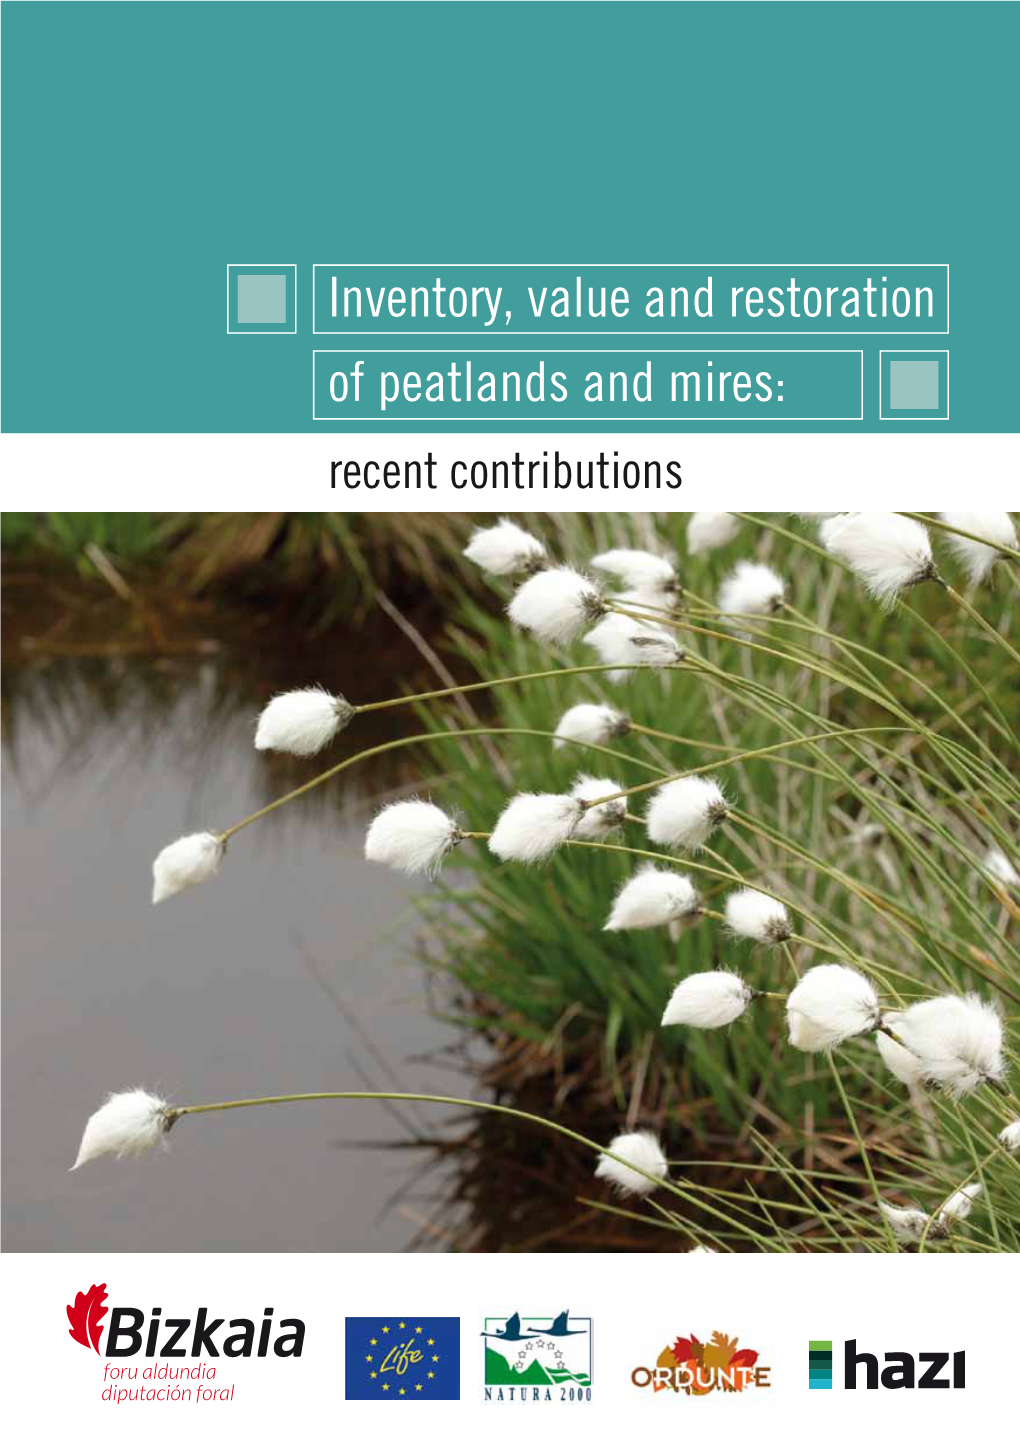 Inventory, Value and Restoration of Peatlands and Mires